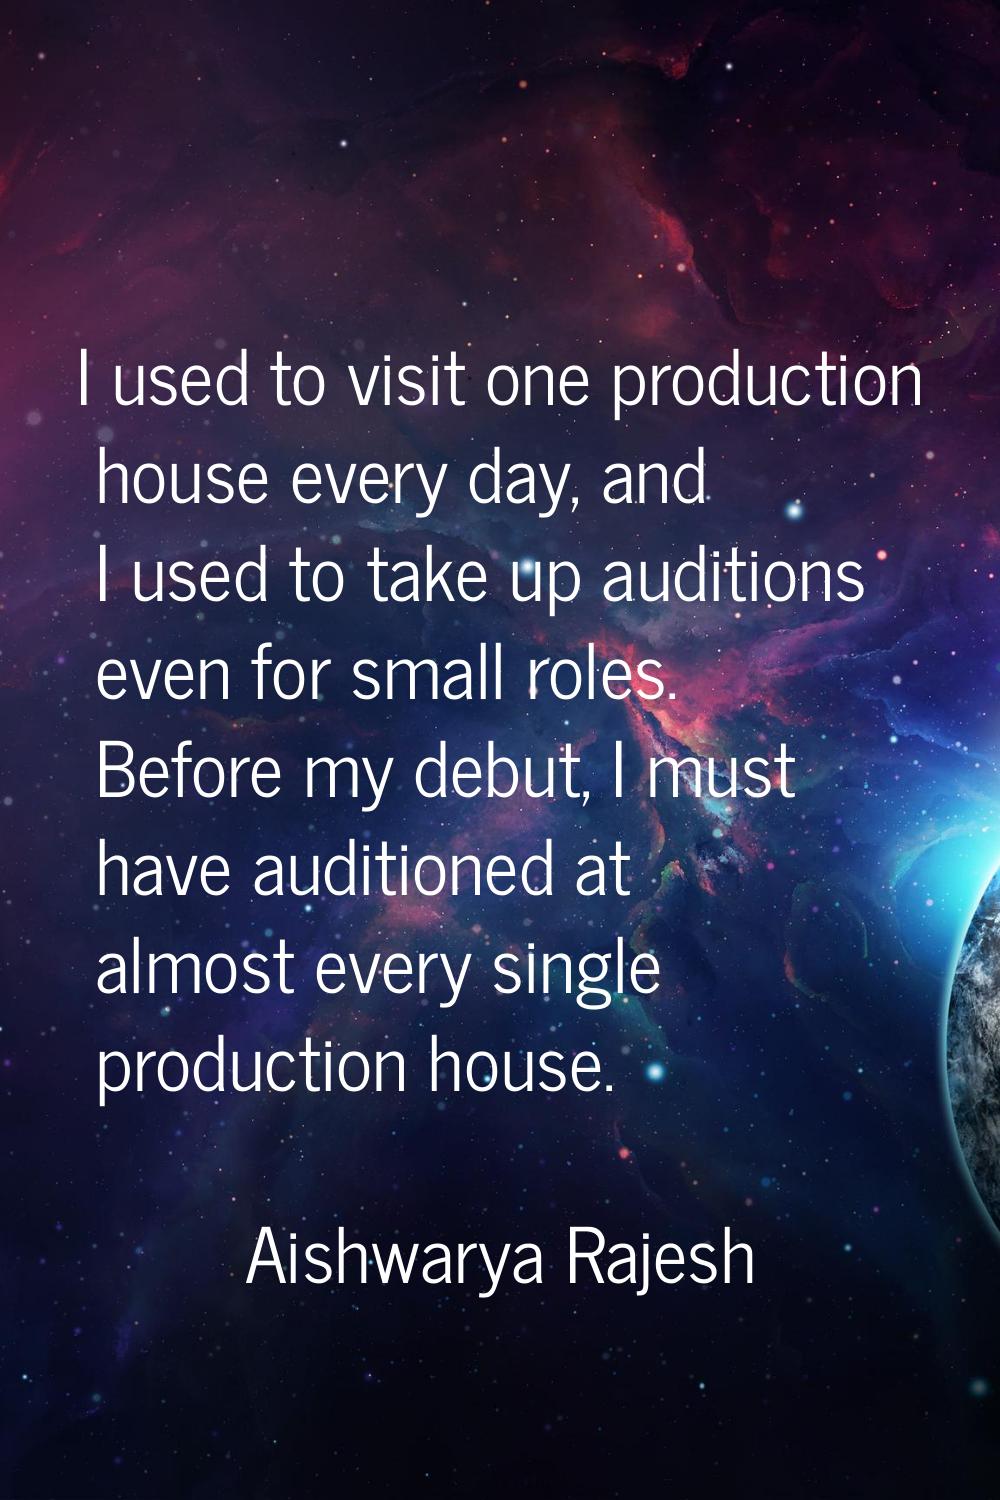 I used to visit one production house every day, and I used to take up auditions even for small role